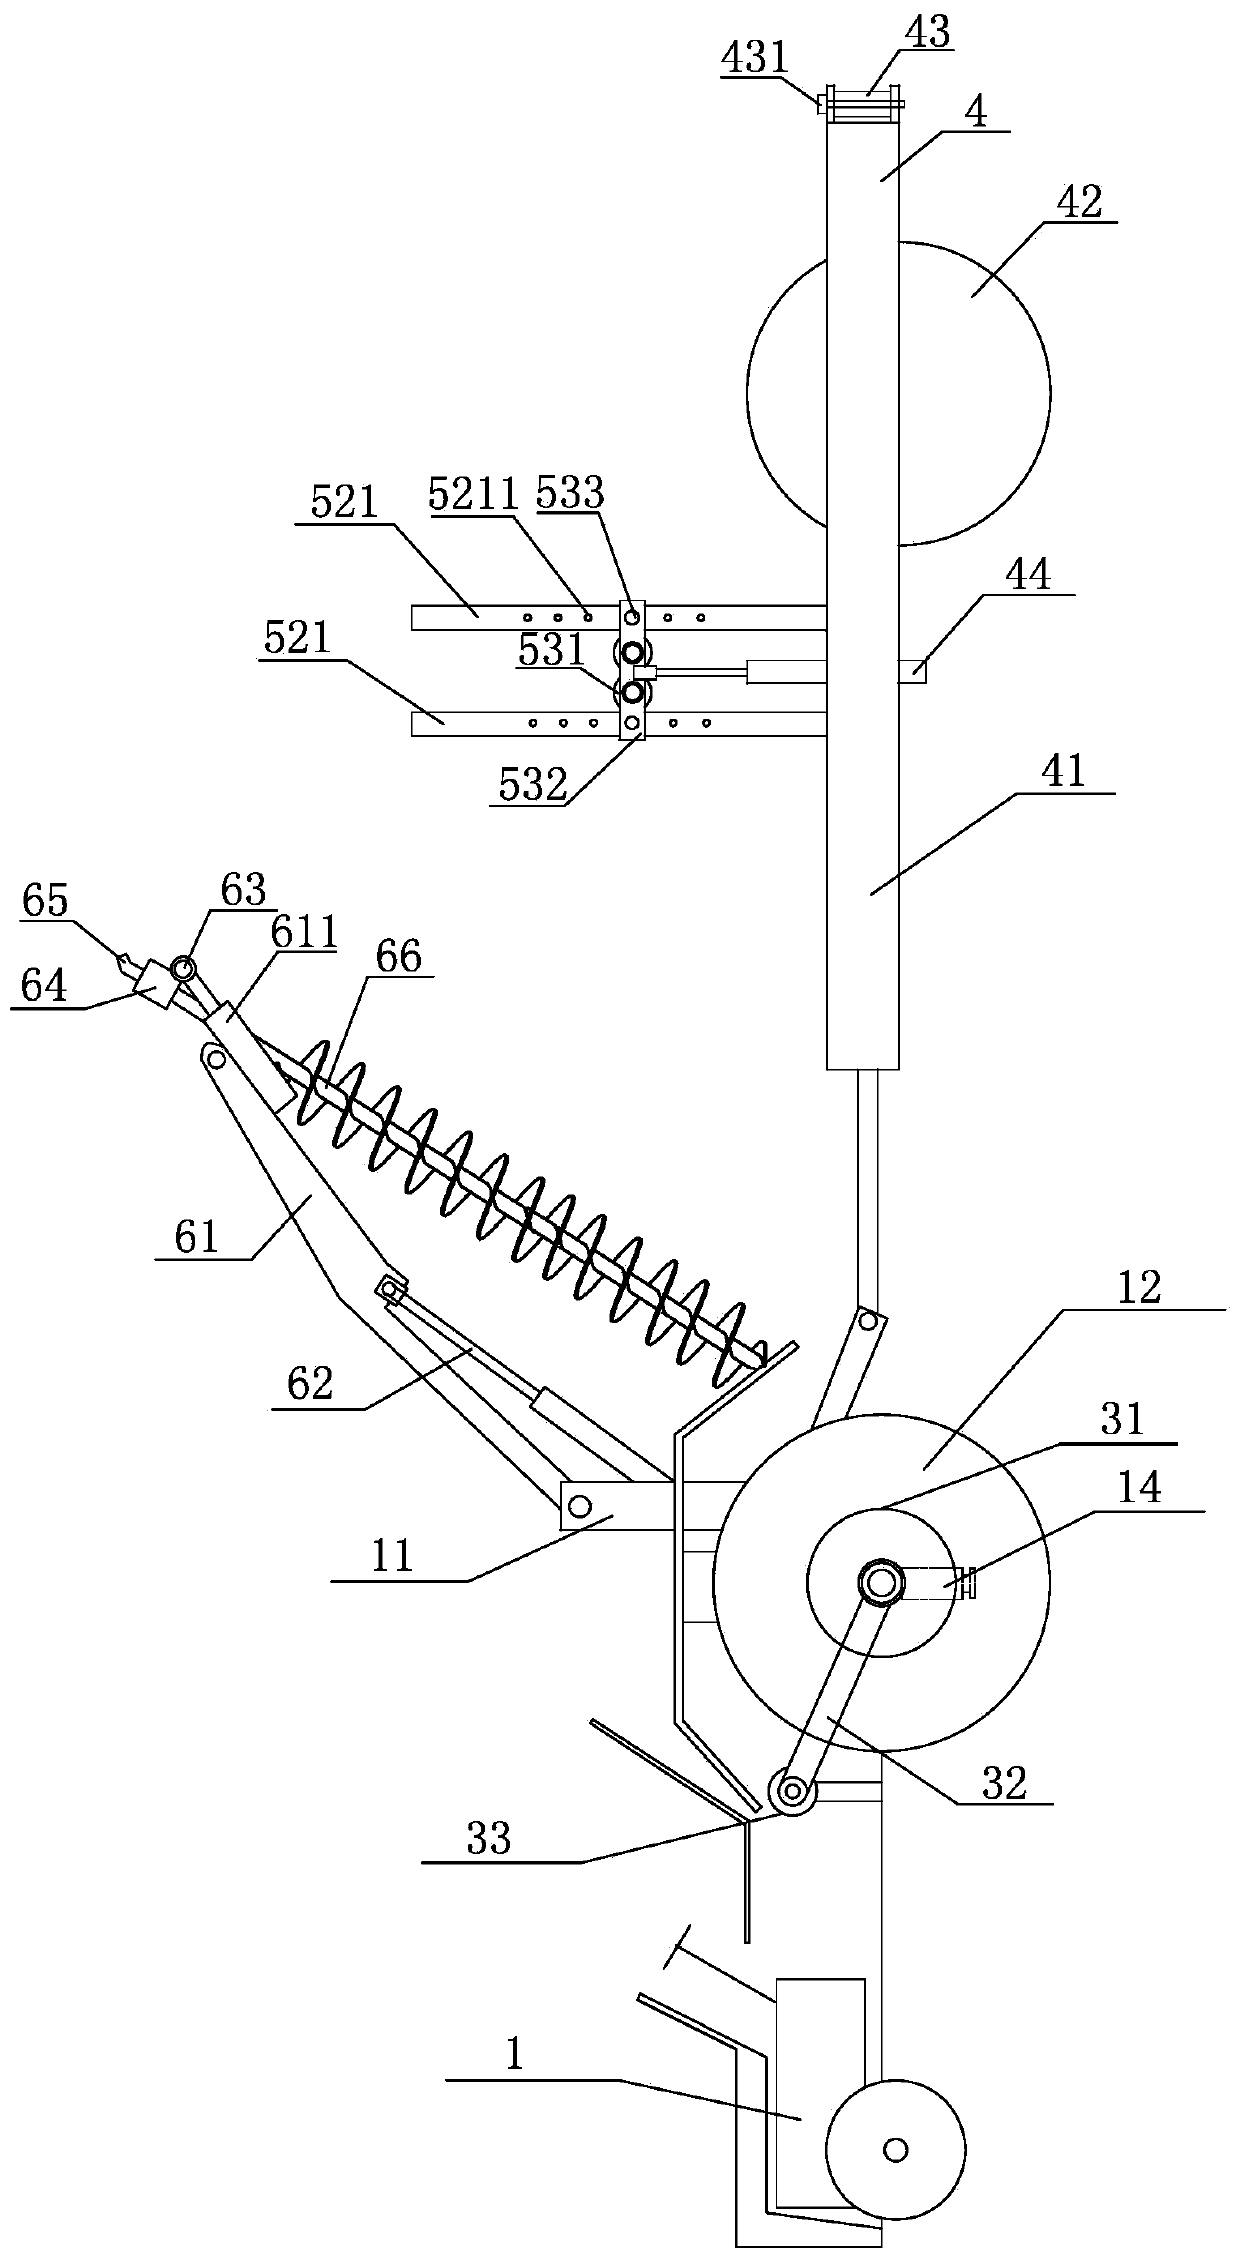 An all-round special device for line construction and a method for using the device to realize wire reel loading